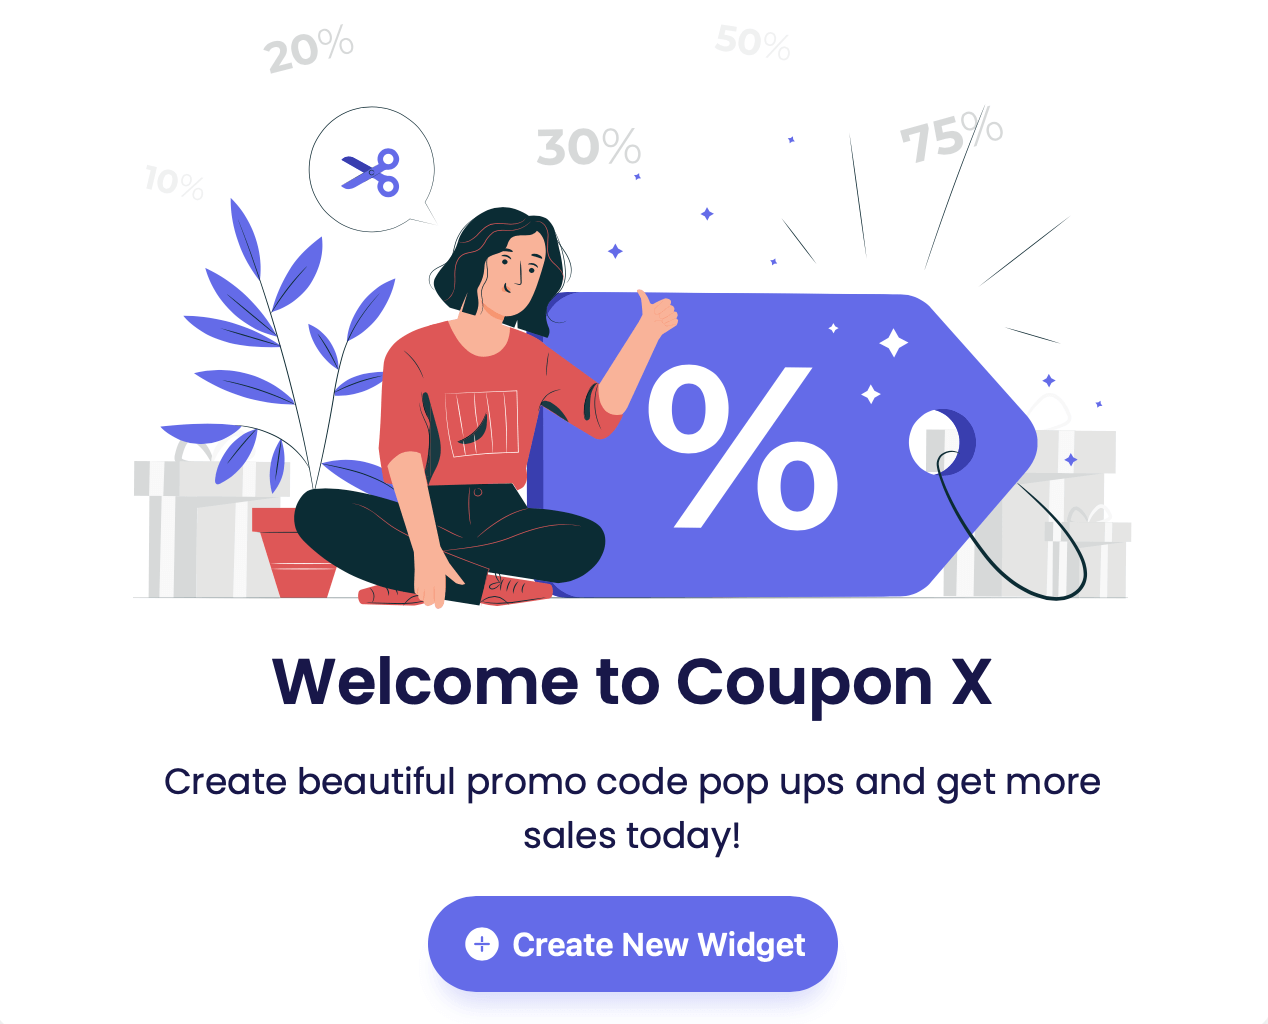 How to Use a Promo Code